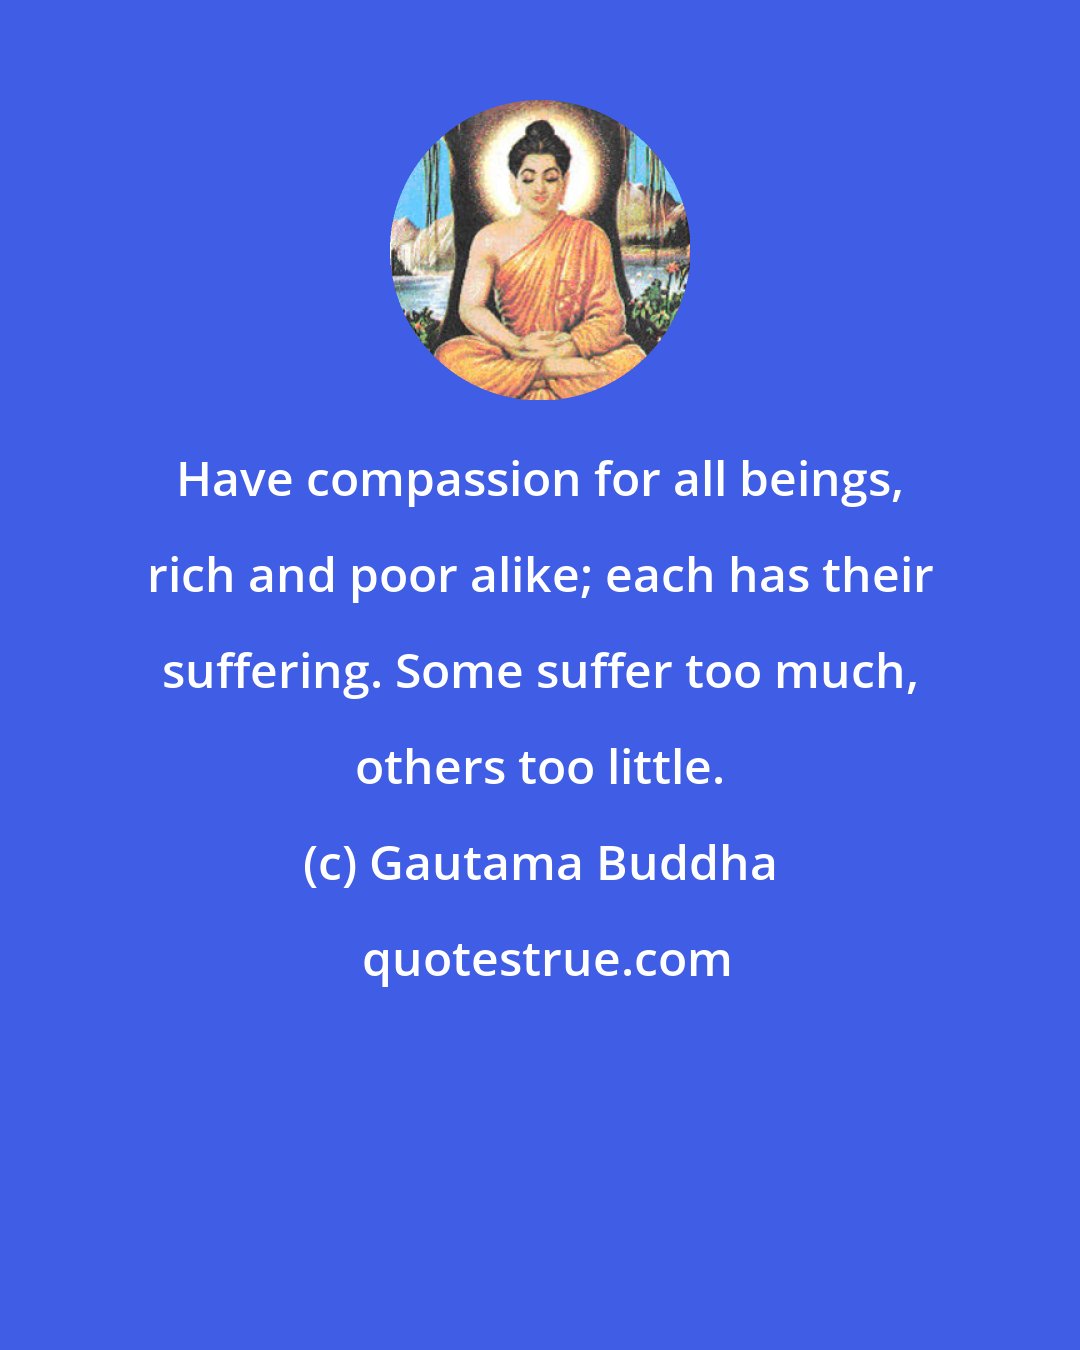 Gautama Buddha: Have compassion for all beings, rich and poor alike; each has their suffering. Some suffer too much, others too little.